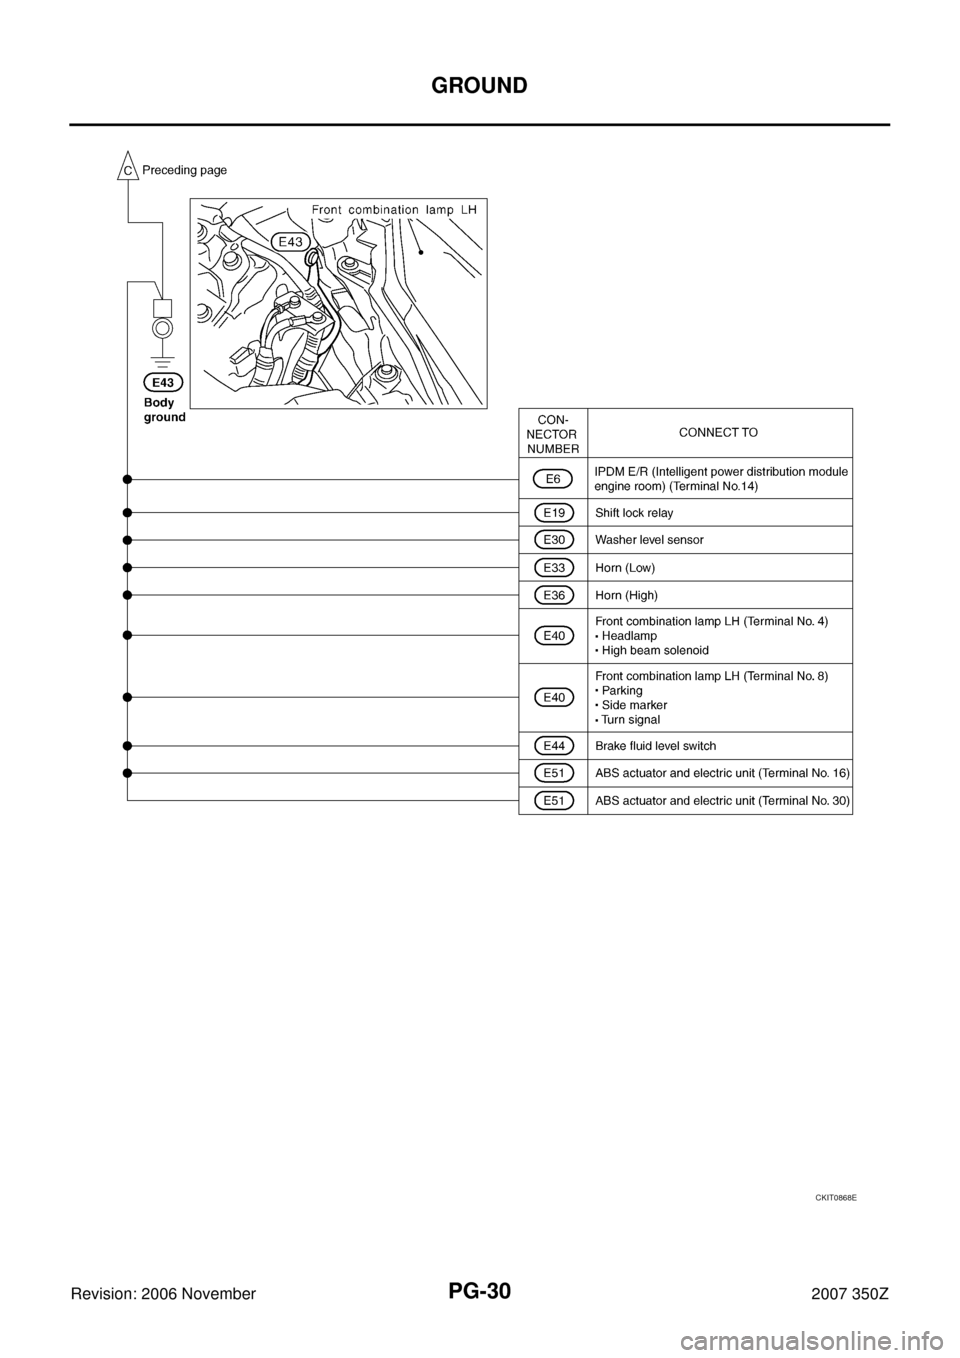 NISSAN 350Z 2007 Z33 Power Supply, Ground And Circuit Owners Manual PG-30
GROUND
Revision: 2006 November2007 350Z
CKIT0868E 